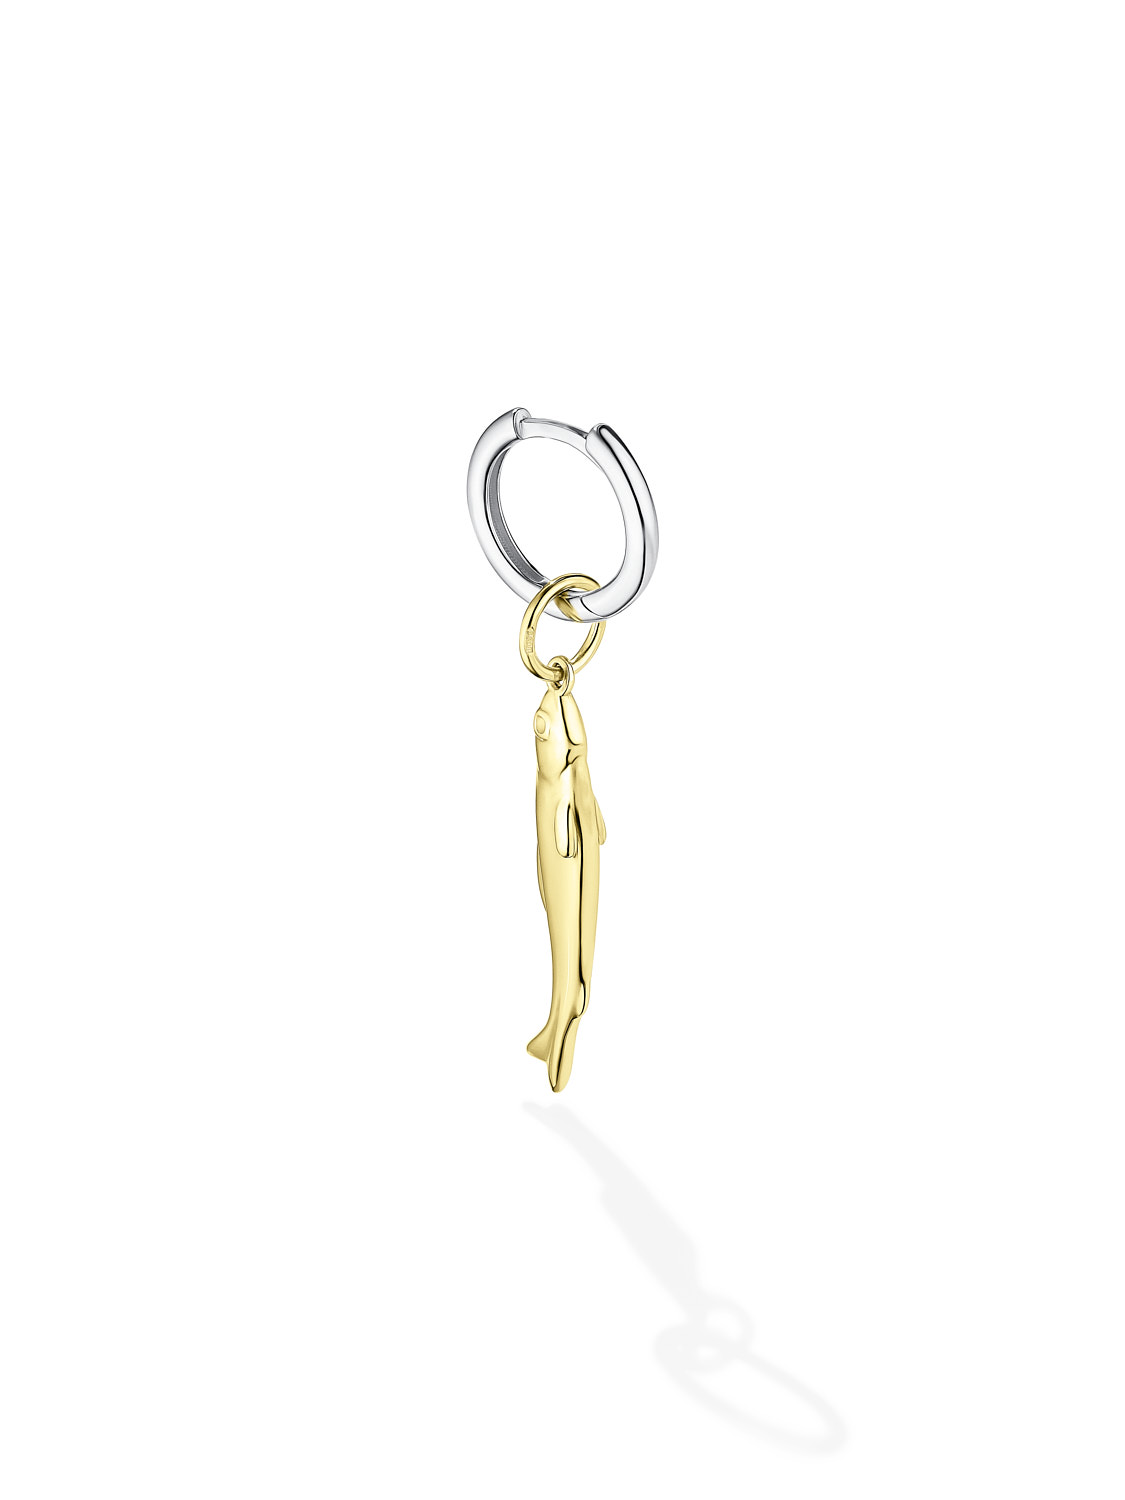 FISH TRINKET GOLD-PLATED  